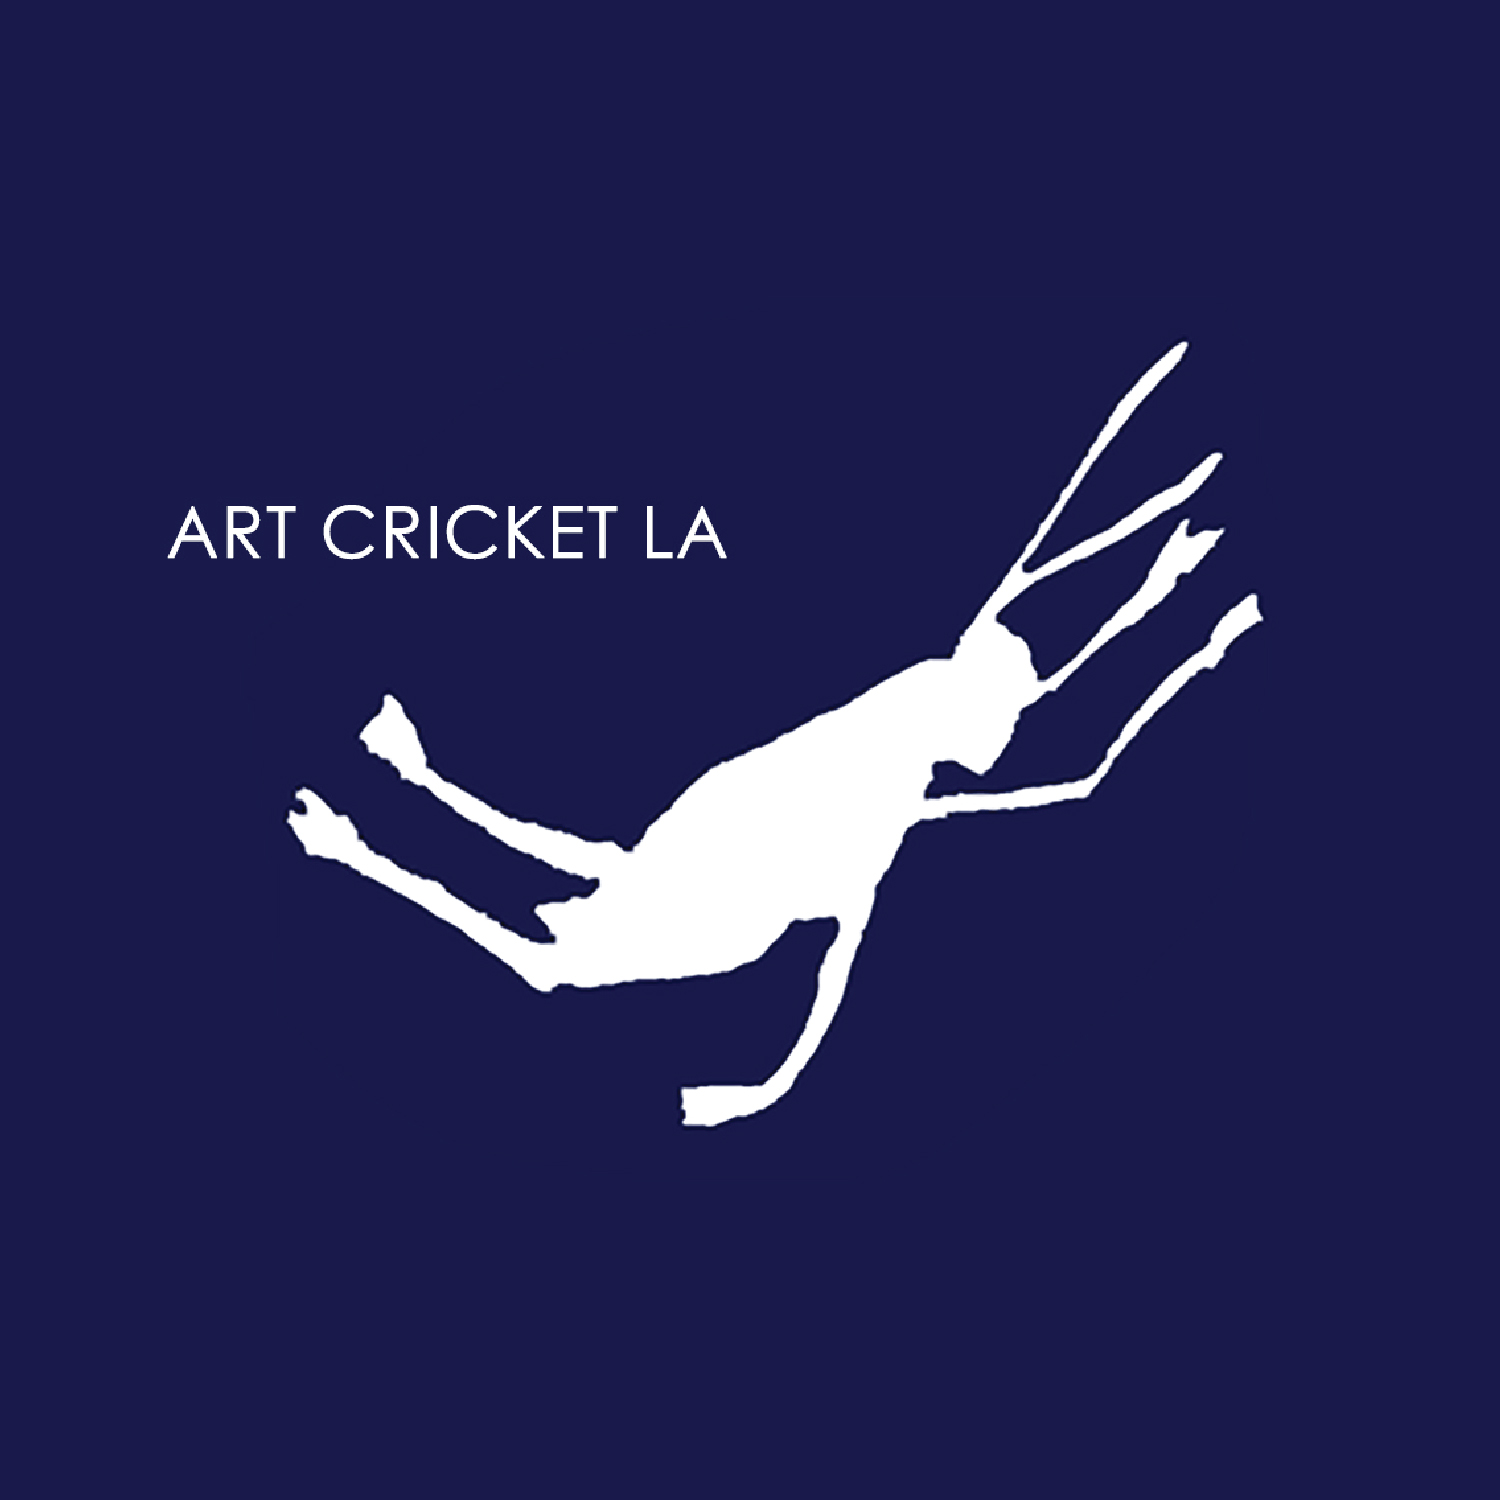 art cricket logo for los angeles art consultancy by diana kohne design depicts a cricket jumping midair